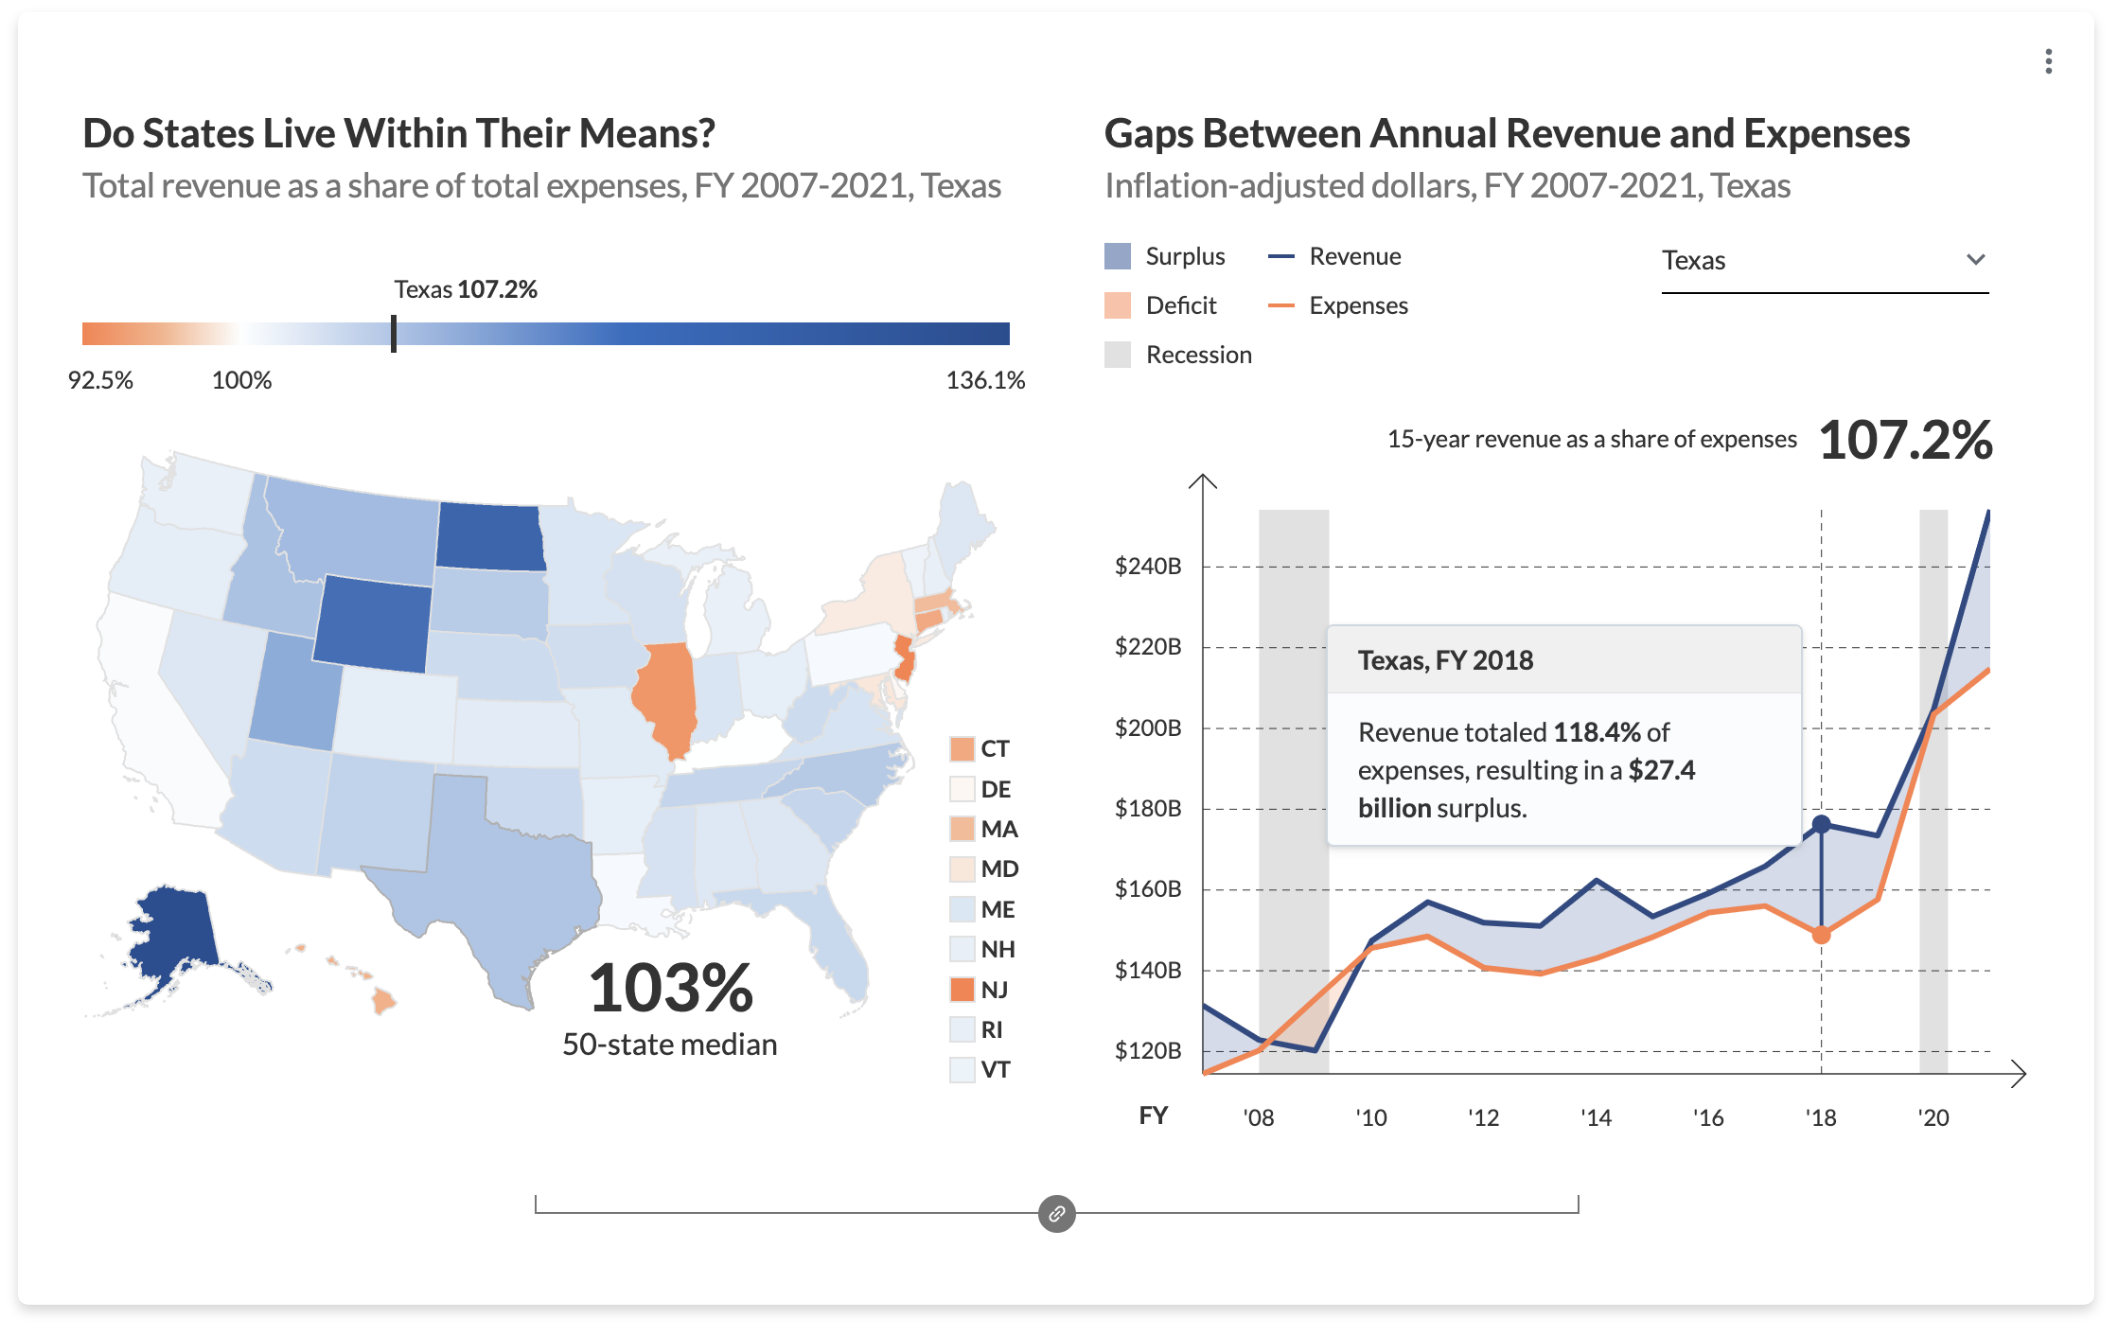 Two side-by-side visualizations demonstrating state fiscal balance indicator. The left chart, titled 'Do States Live Within Their Means? Total revenue as a share of total expenses, FY 2007-2021, Texas,' is a choropleth map showing the revenue-to-expense ratios of U.S. states, with Texas highlighted at 107.2%. The map uses shades of blue and orange to represent states above or below the 100% threshold, respectively, with the 50-state median at 103%. The right chart, titled 'Gaps Between Annual Revenue and Expenses, Inflation-adjusted dollars, FY 2007-2021, Texas,' is an area chart displaying revenue (blue line) and expenses (orange line) over time, with shaded areas indicating periods of surplus or deficit. The chart includes a dropdown menu for selecting different states, dynamically updating the data displayed. An annotation highlights that in FY 2018, Texas' revenue totaled 118.4% of expenses, resulting in a $27.4 billion surplus. Gray shaded areas represent recessions. The interactive feature allows users to select a state from the map on the left to populate the area chart on the right.